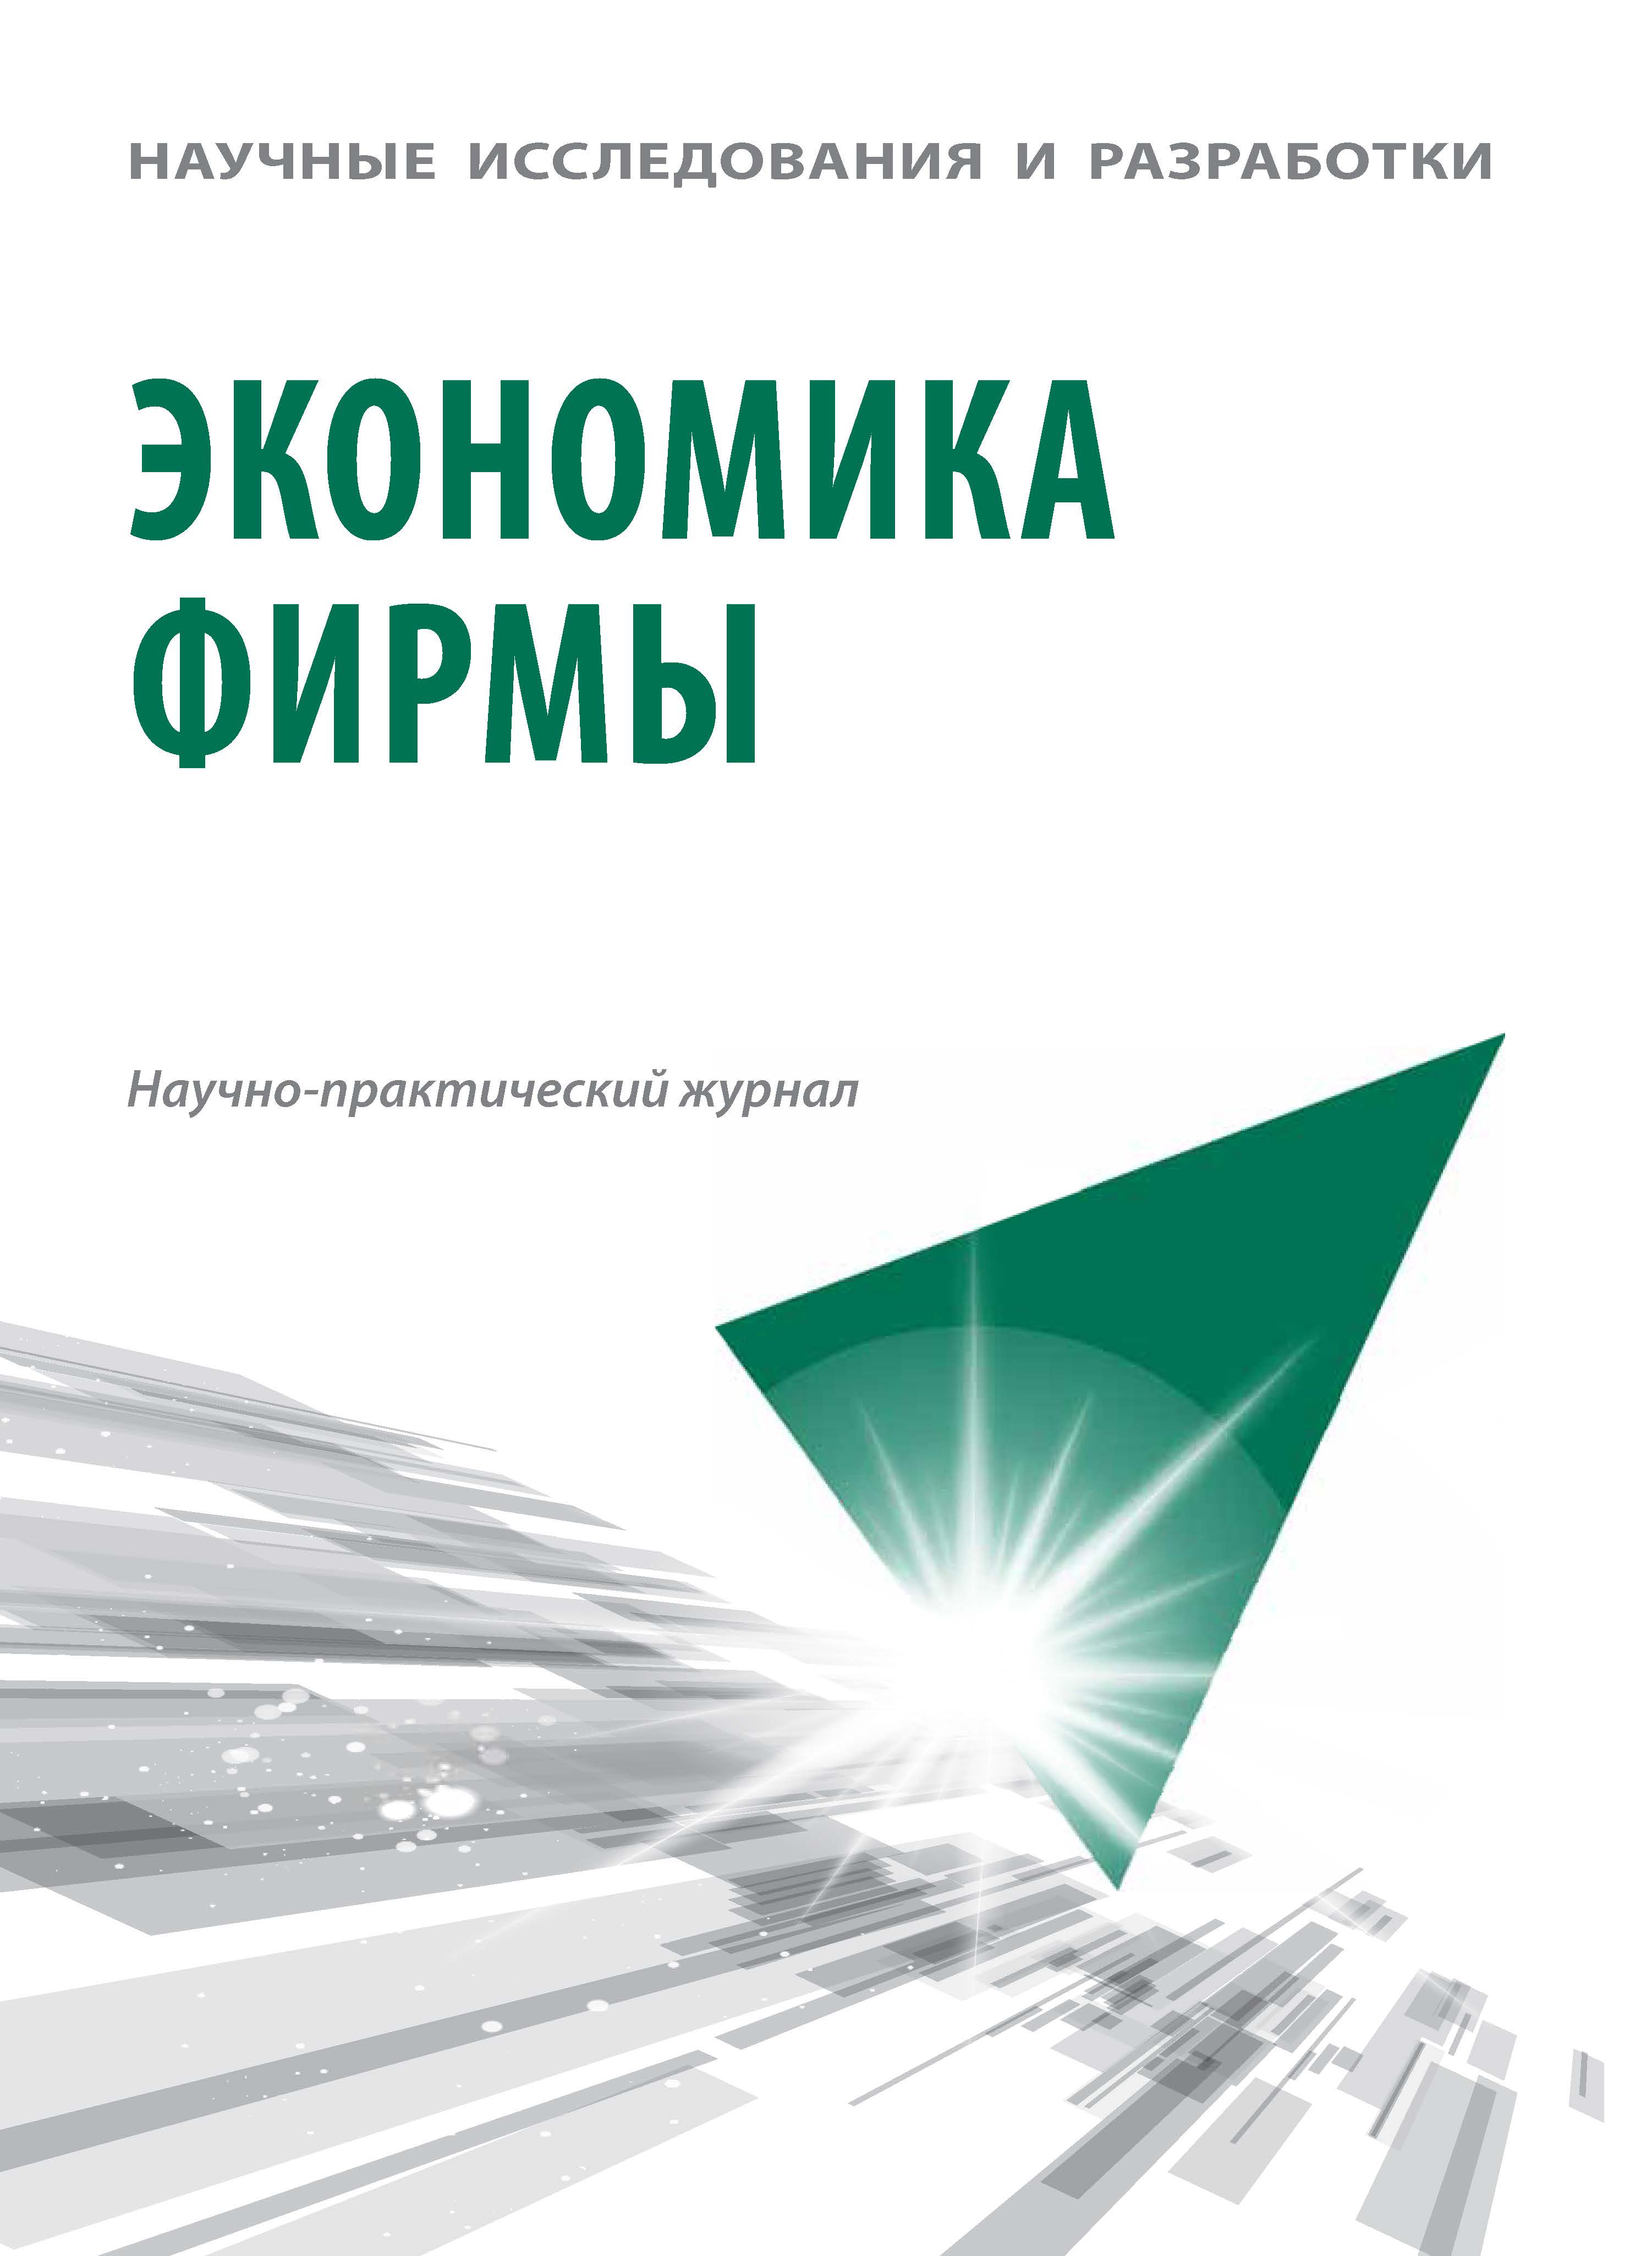                         Development of Human Resources in the Hospitality and Tourism Industry of Russia Within the Framework of National Projects
            